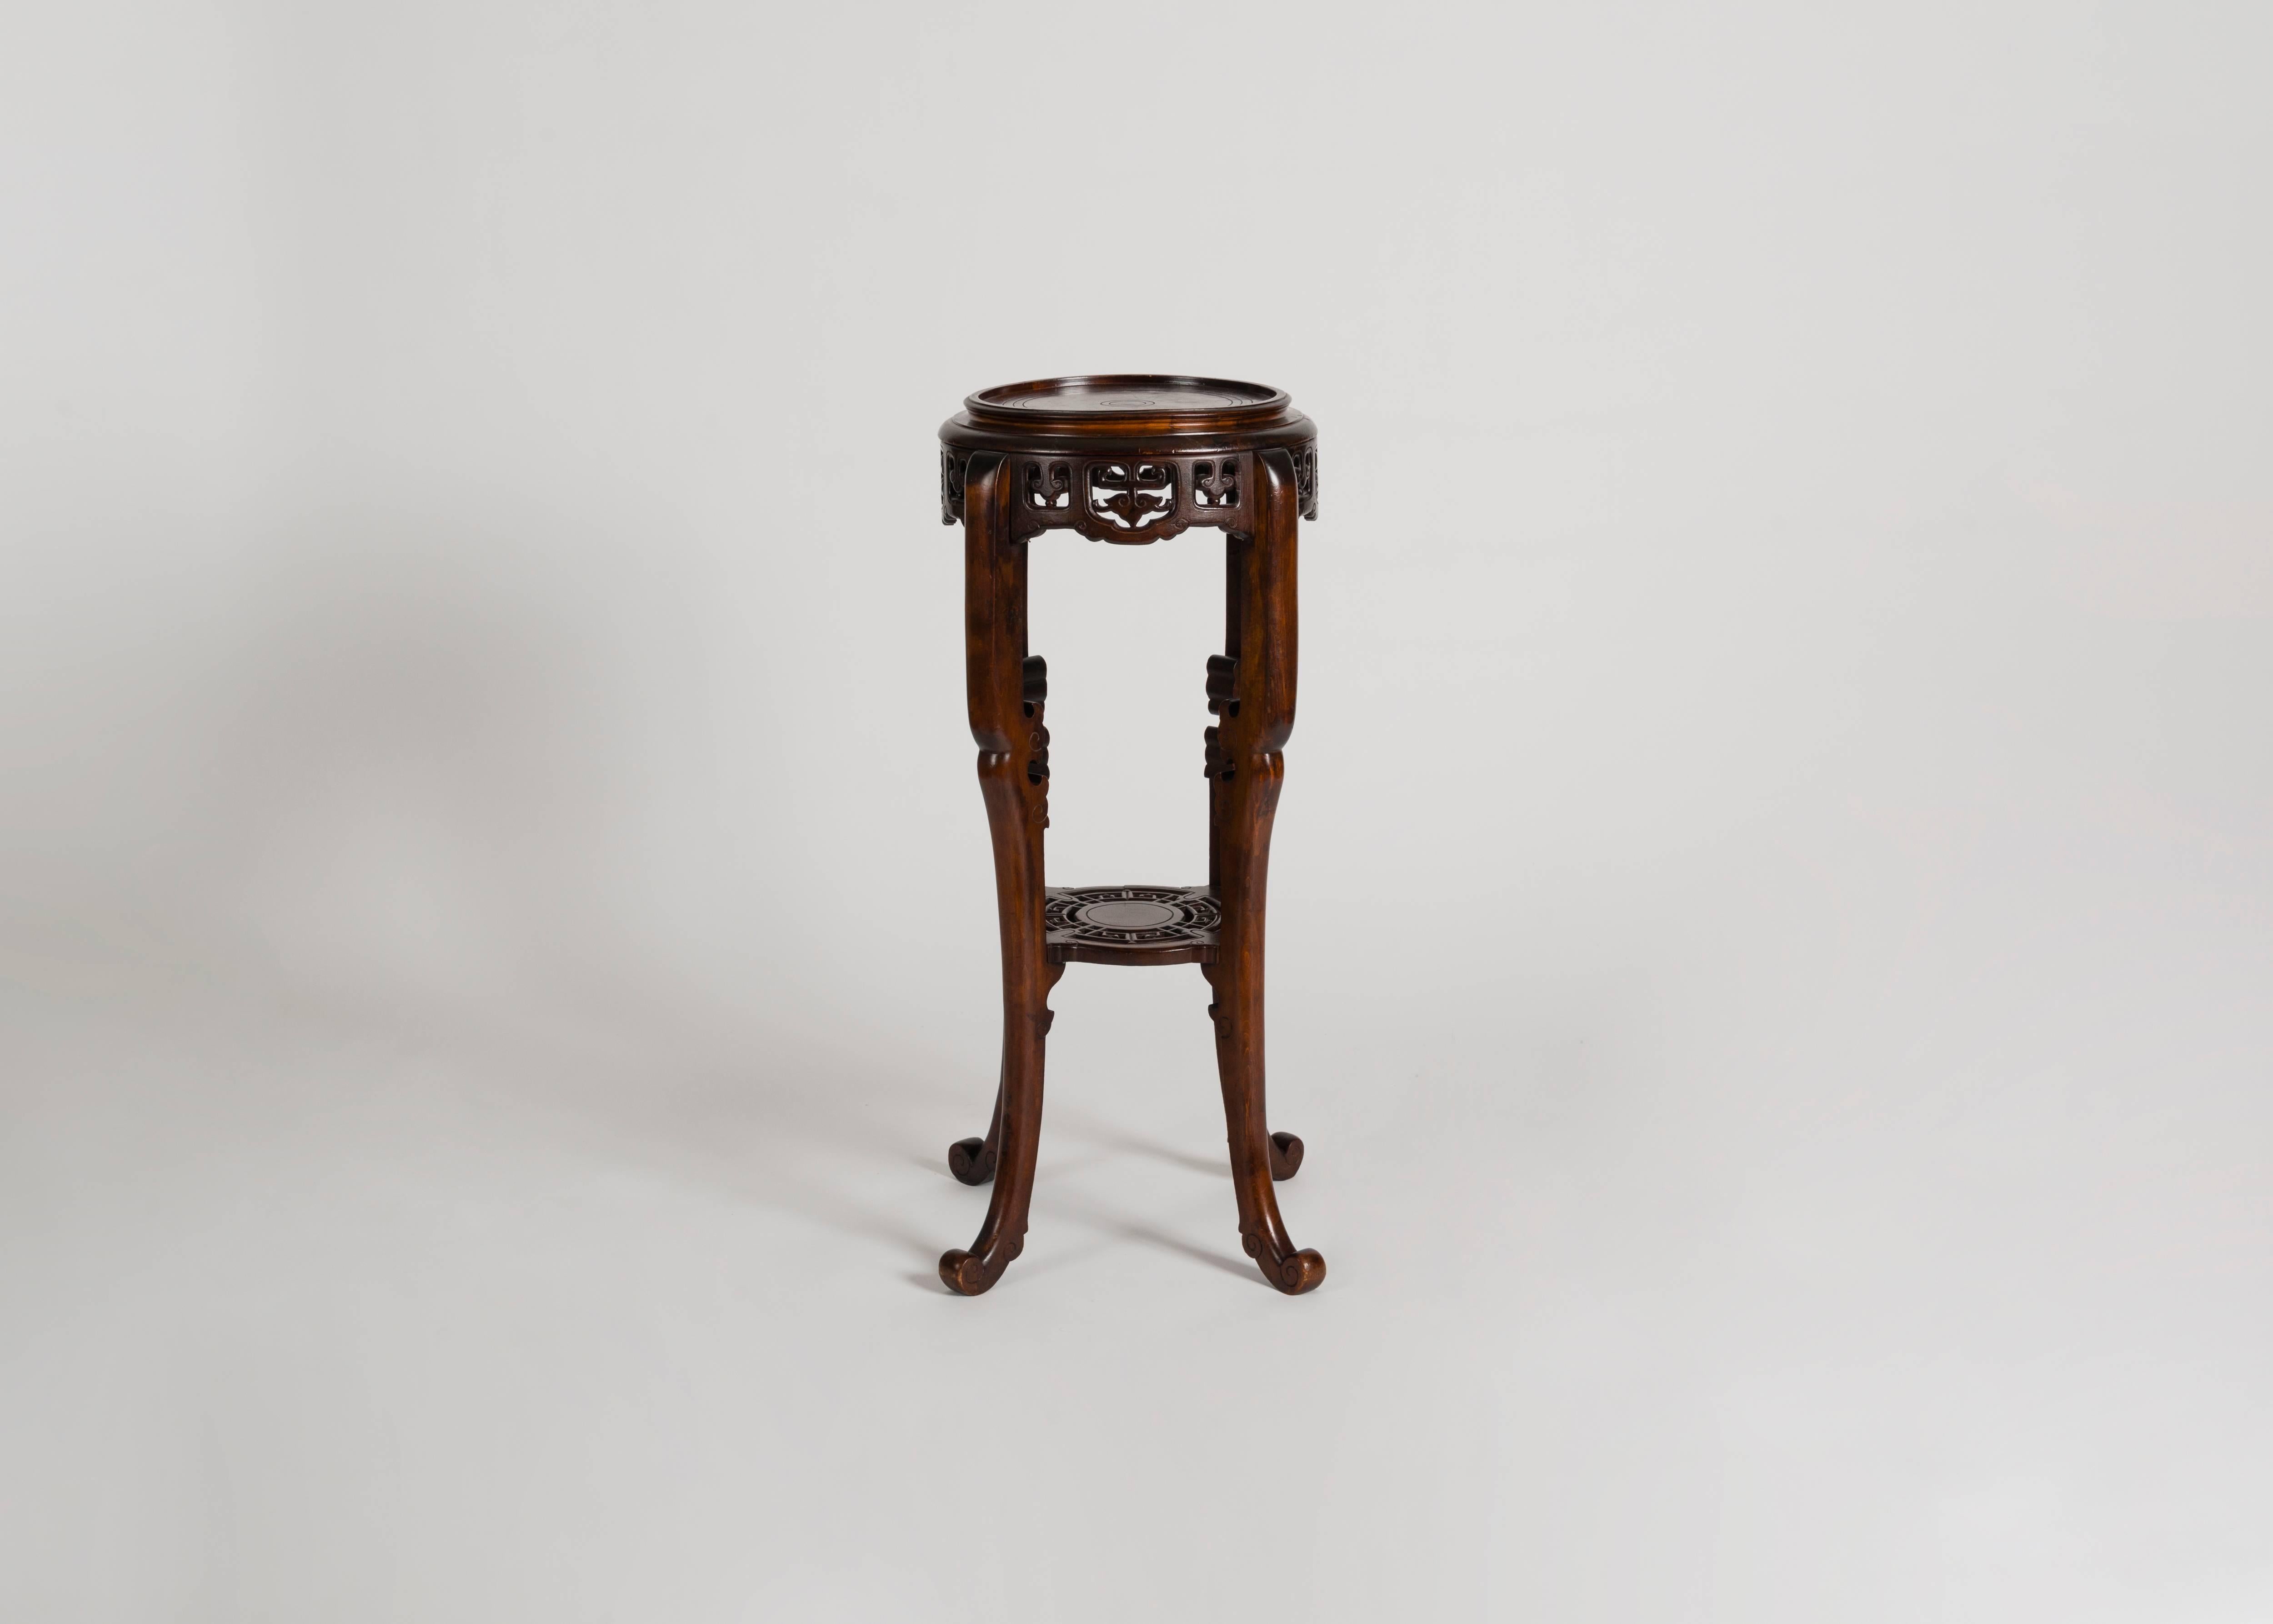 Signed.

A two-tiered, tall side table by Gabriel Viardot, a French cabinetmaker whose elaborate carvings and use of eastern motifs propelled him to fame in the late 19th century.